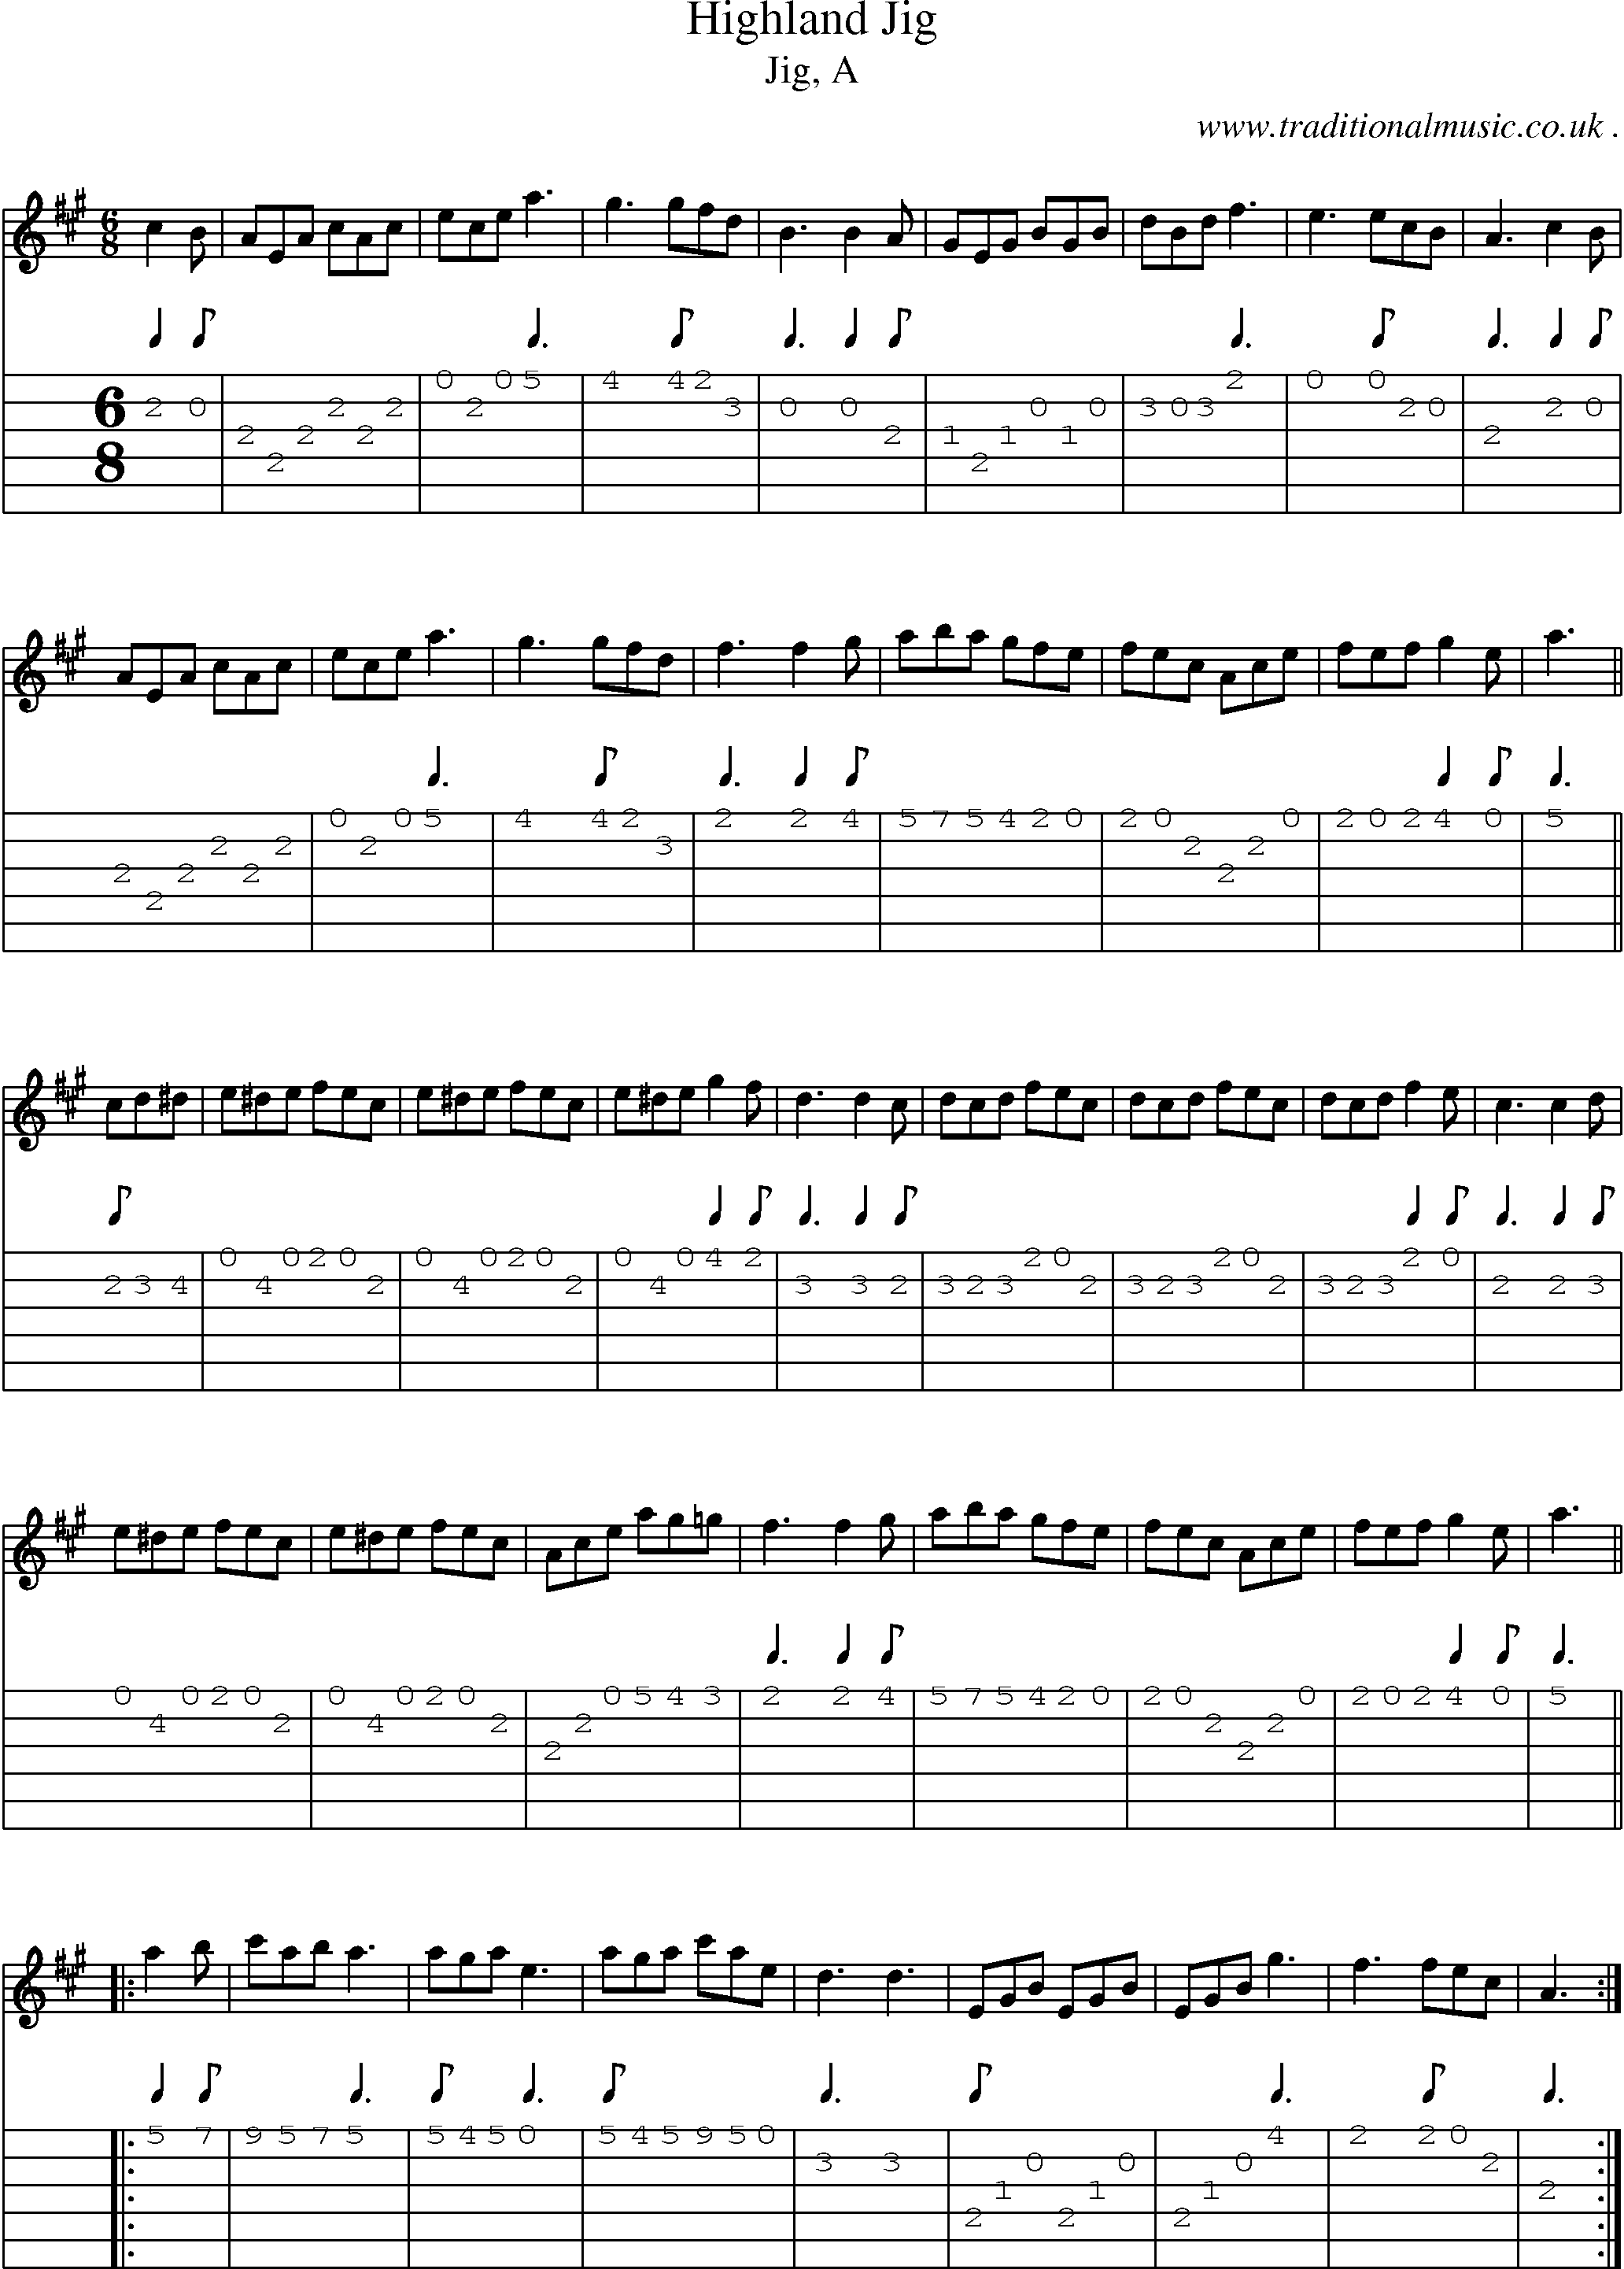 Sheet-music  score, Chords and Guitar Tabs for Highland Jig